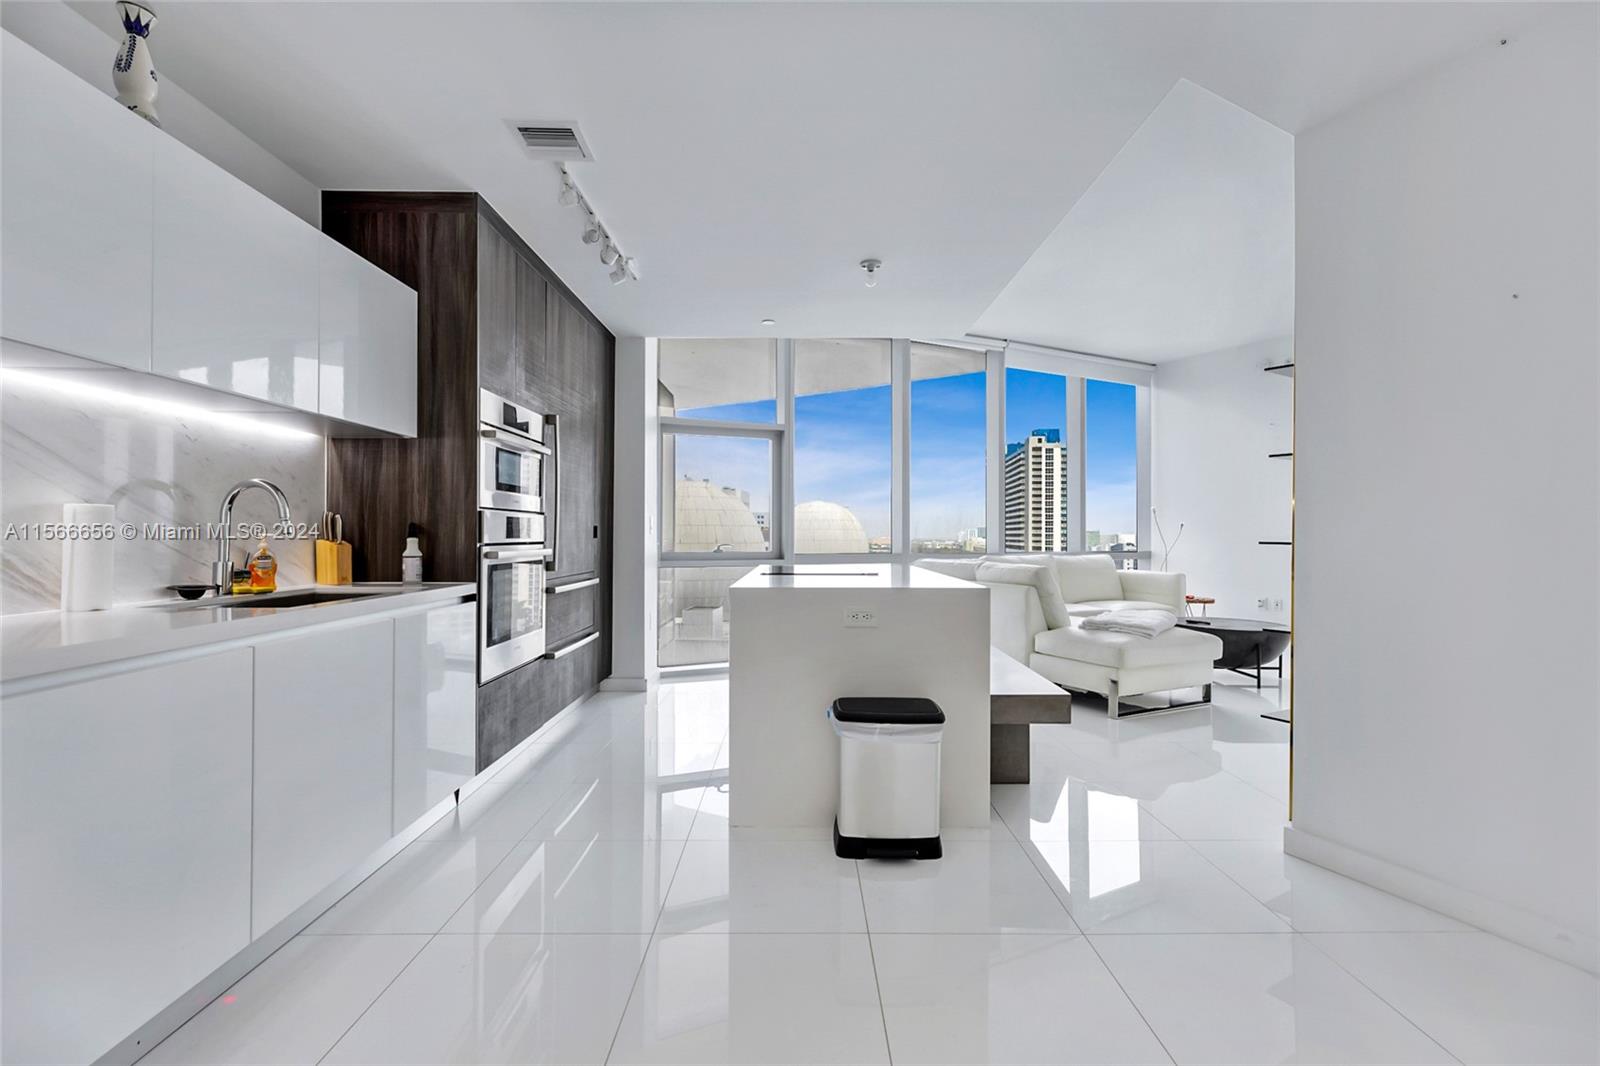 Perfect location In Hard Downtown Miami World Center HIGH CEILINGS 10' WITH A FLOOR TO CEILING WINDOWS ITALIAN KITCHEN AND TOP OF THE LINE APPLIANCES BOSH MARBLE FLOOR Most Amenities in the World including Basketball Court, 5 pools, Spa, Gym with boxing area, Bbq Kitchen, Virtual Golf, Recording Studio, Racquetball, Yoga, Sunrise pool, & Kids Play Area. Skydeck, Observatory to view stars with telescopes, Tennis courts, and Jacuzzi.